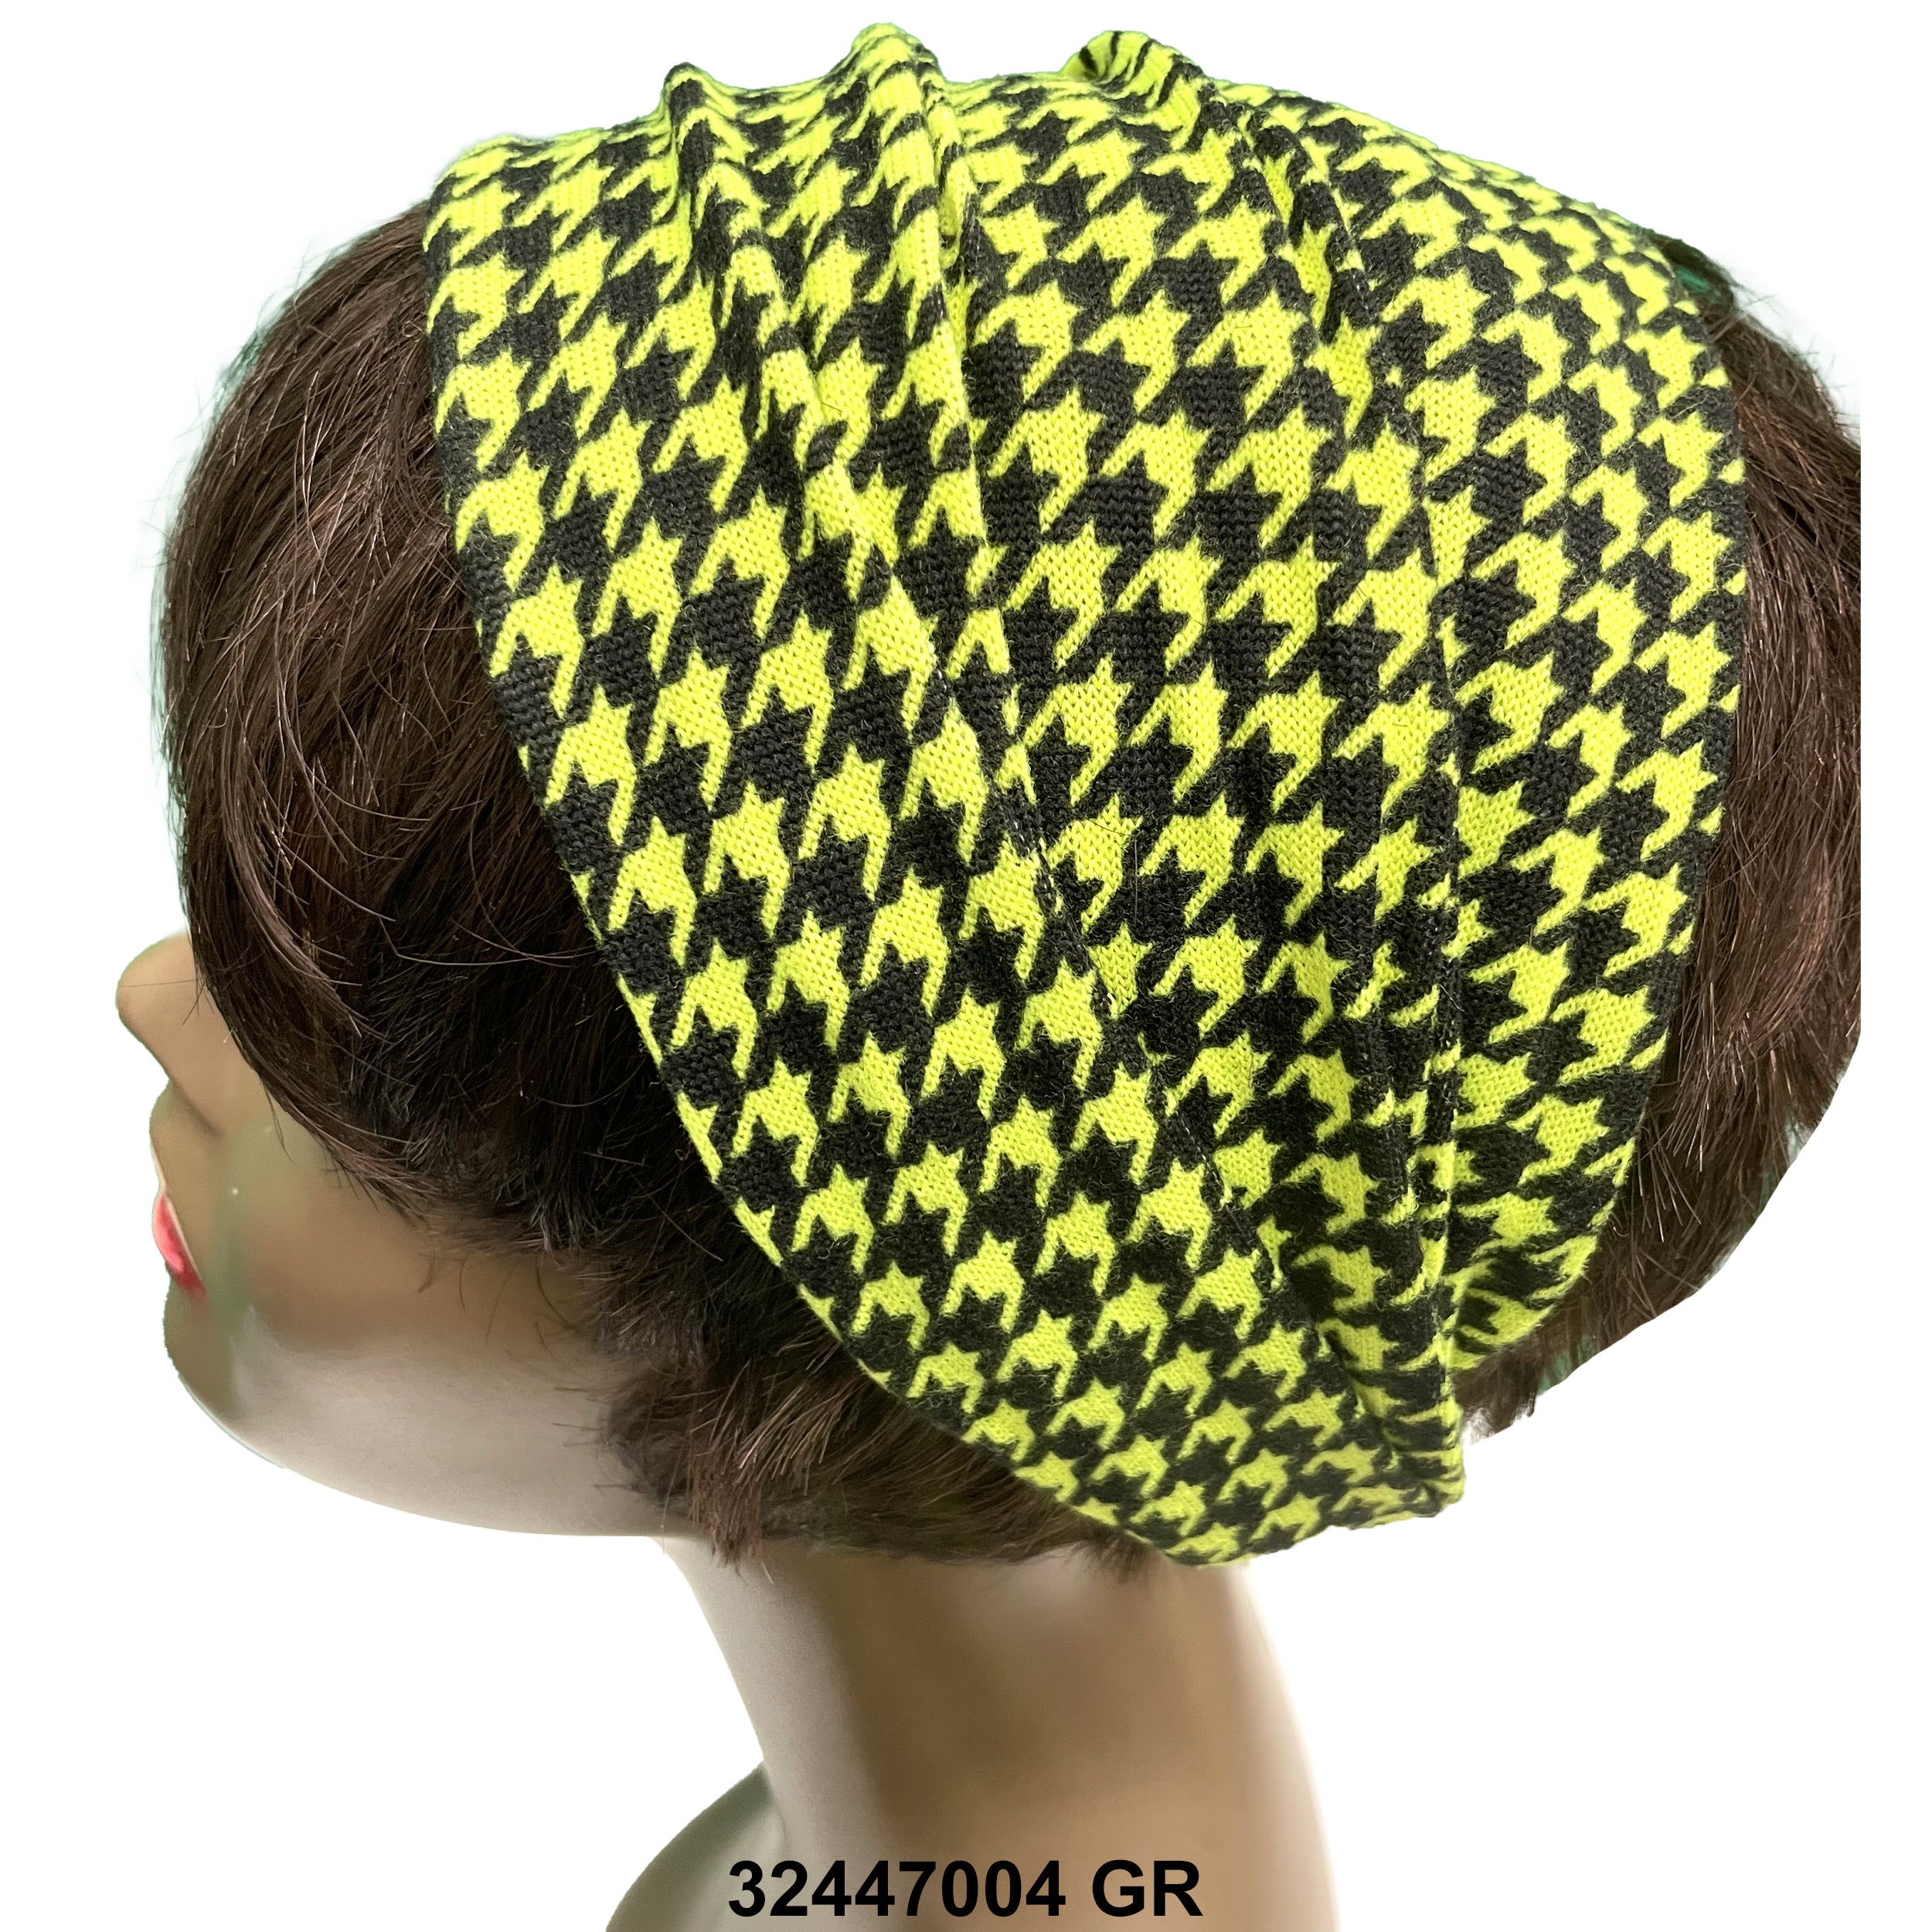 Head Bands (HOUNDS TOOTH) 32447004